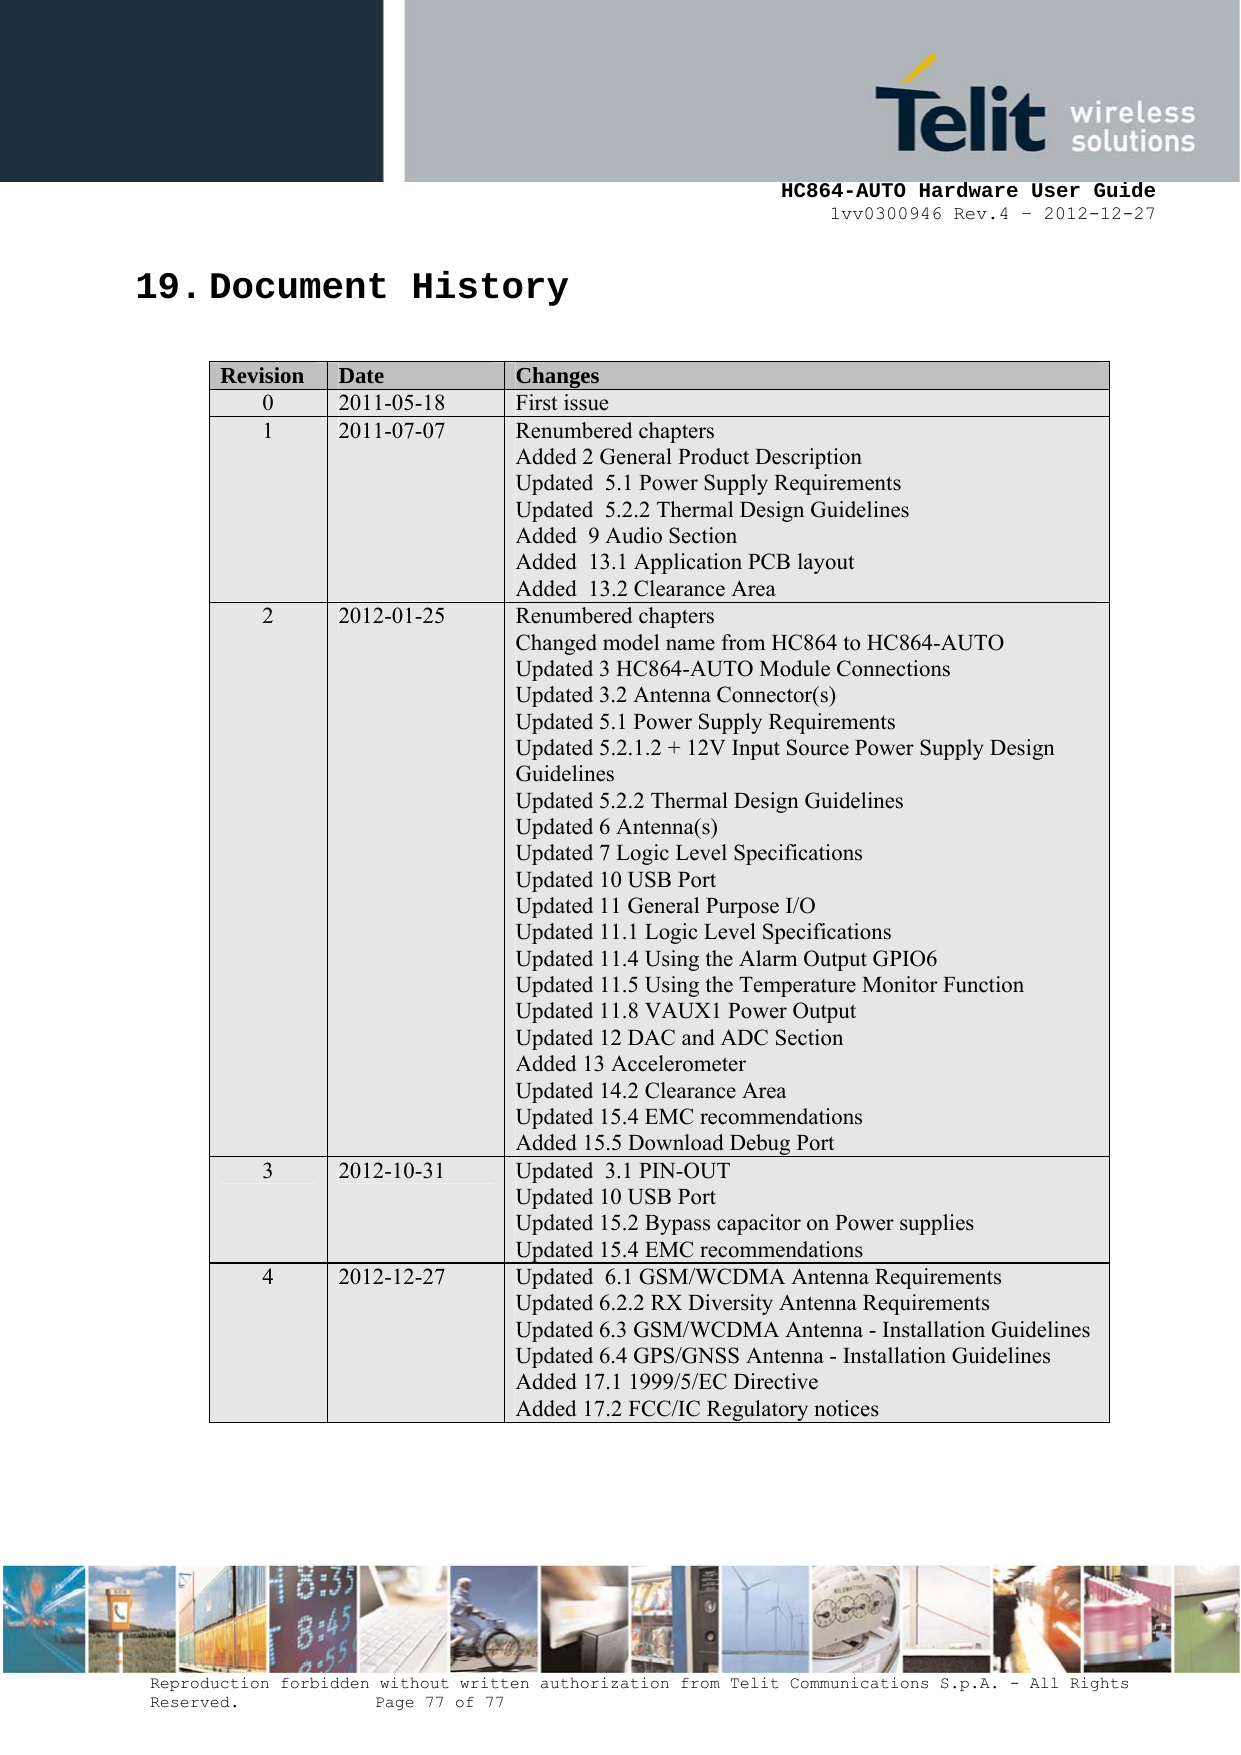     HC864-AUTO Hardware User Guide 1vv0300946 Rev.4 – 2012-12-27 Reproduction forbidden without written authorization from Telit Communications S.p.A. - All Rights Reserved.    Page 77 of 77  19. Document History  Revision  Date  Changes 0  2011-05-18  First issue  1  2011-07-07  Renumbered chapters Added 2 General Product Description Updated  5.1 Power Supply Requirements Updated  5.2.2 Thermal Design Guidelines Added  9 Audio Section Added  13.1 Application PCB layout Added  13.2 Clearance Area 2  2012-01-25  Renumbered chapters Changed model name from HC864 to HC864-AUTO Updated 3 HC864-AUTO Module Connections Updated 3.2 Antenna Connector(s) Updated 5.1 Power Supply Requirements Updated 5.2.1.2 + 12V Input Source Power Supply Design Guidelines Updated 5.2.2 Thermal Design Guidelines Updated 6 Antenna(s) Updated 7 Logic Level Specifications Updated 10 USB Port Updated 11 General Purpose I/O Updated 11.1 Logic Level Specifications Updated 11.4 Using the Alarm Output GPIO6 Updated 11.5 Using the Temperature Monitor Function Updated 11.8 VAUX1 Power Output Updated 12 DAC and ADC Section Added 13 Accelerometer Updated 14.2 Clearance Area Updated 15.4 EMC recommendations Added 15.5 Download Debug Port 3  2012-10-31  Updated  3.1 PIN-OUT Updated 10 USB Port Updated 15.2 Bypass capacitor on Power supplies Updated 15.4 EMC recommendations 4  2012-12-27  Updated  6.1 GSM/WCDMA Antenna Requirements Updated 6.2.2 RX Diversity Antenna Requirements Updated 6.3 GSM/WCDMA Antenna - Installation Guidelines Updated 6.4 GPS/GNSS Antenna - Installation Guidelines Added 17.1 1999/5/EC Directive Added 17.2 FCC/IC Regulatory notices  